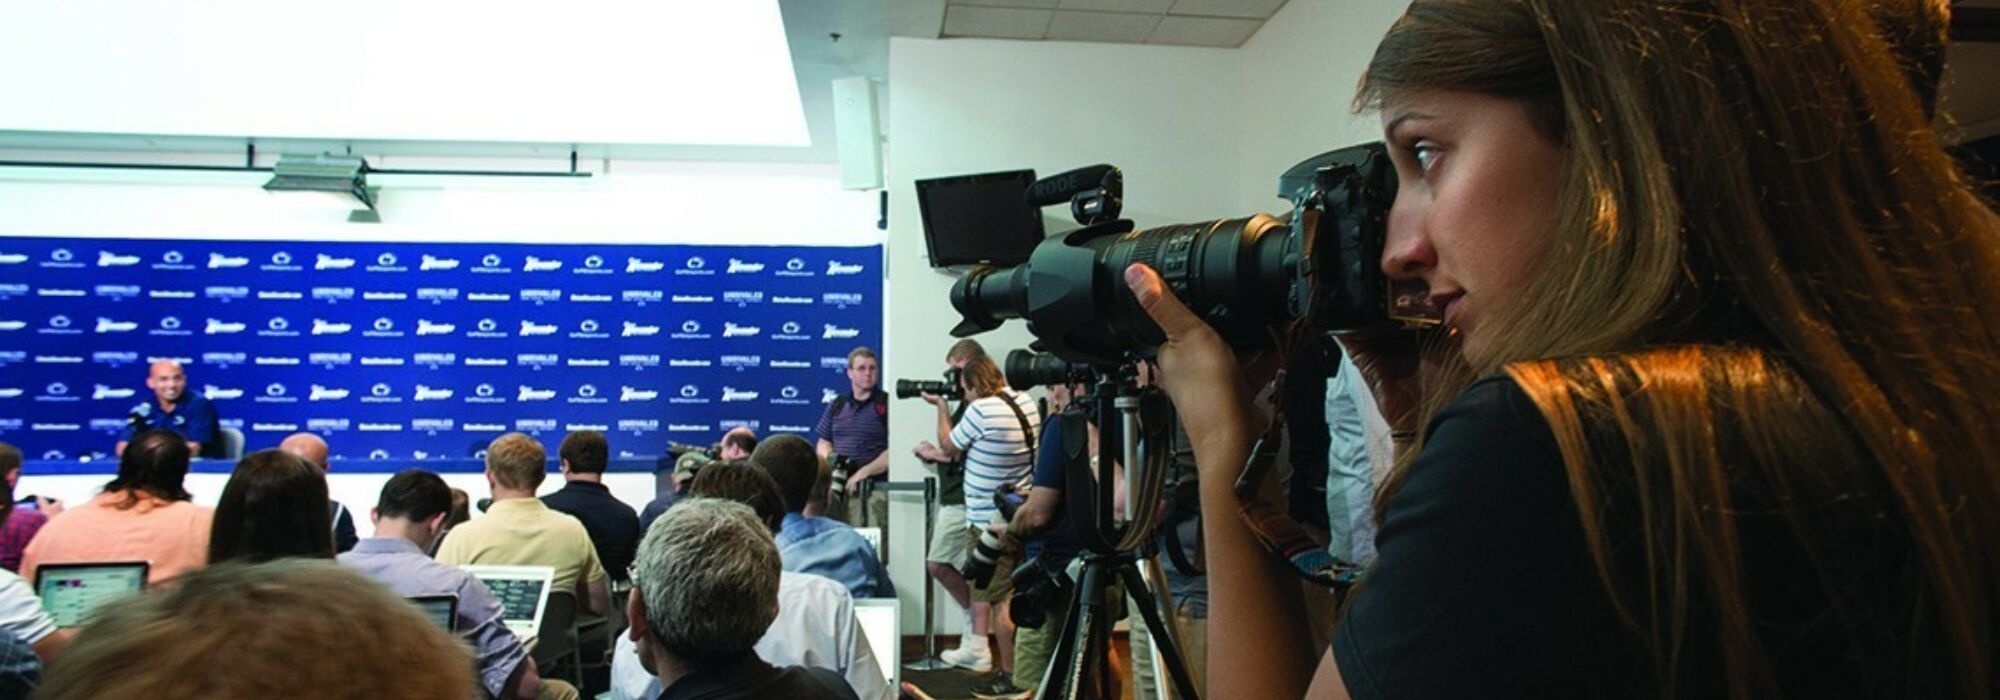 A student photographer for the Curley Center in the foreground is taking a photo of Penn State football coach James Franklin at a press conference.